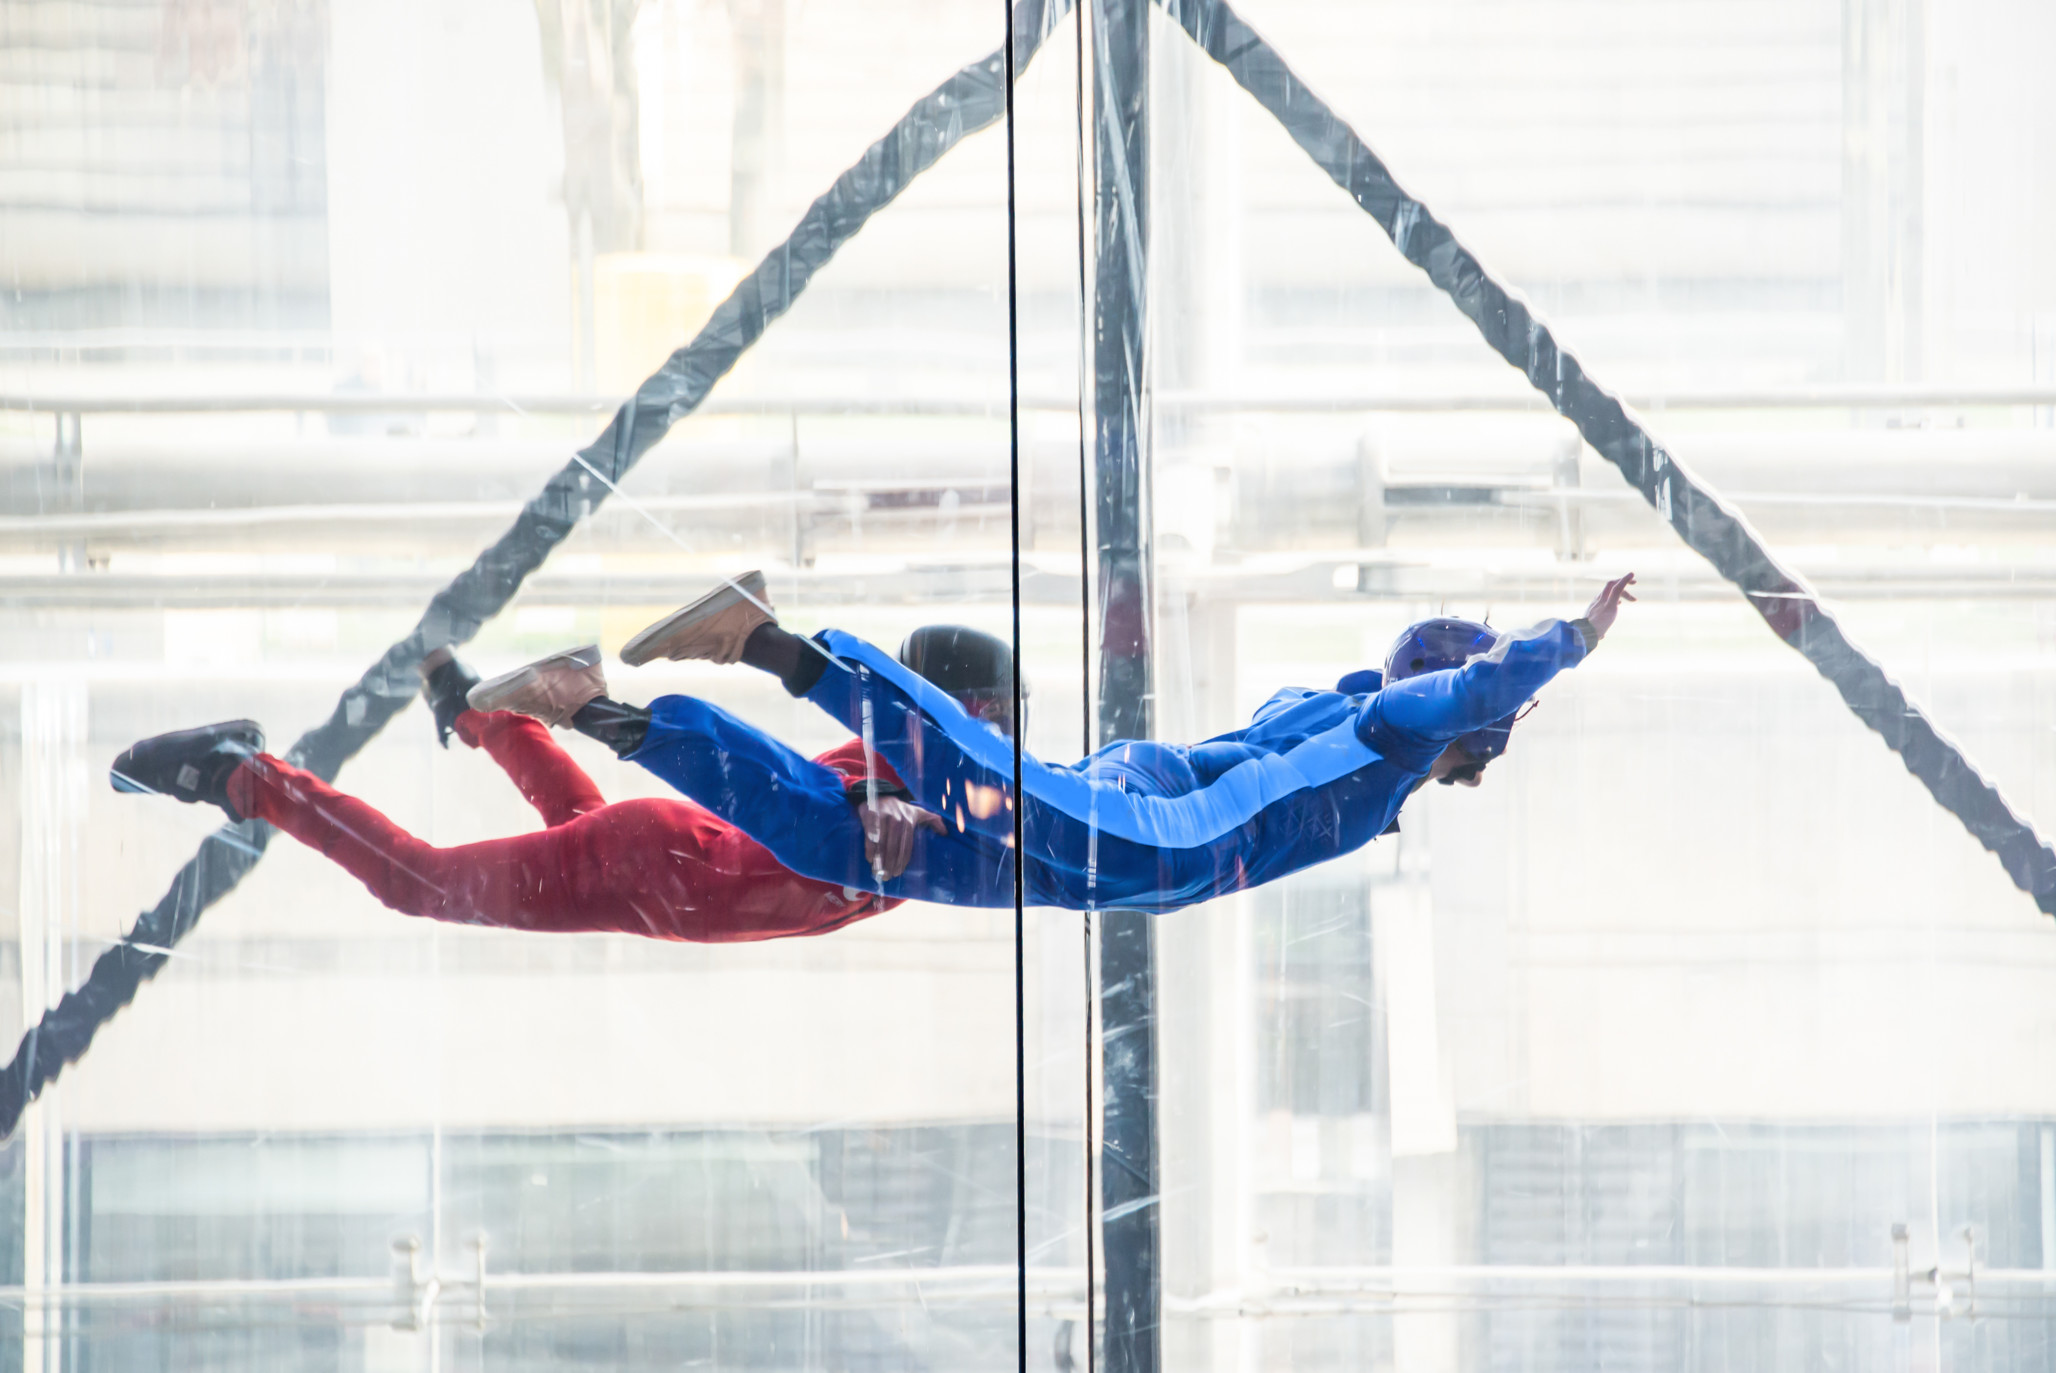 the risks of indoor skydiving and managing risks of an indoor skydiving business